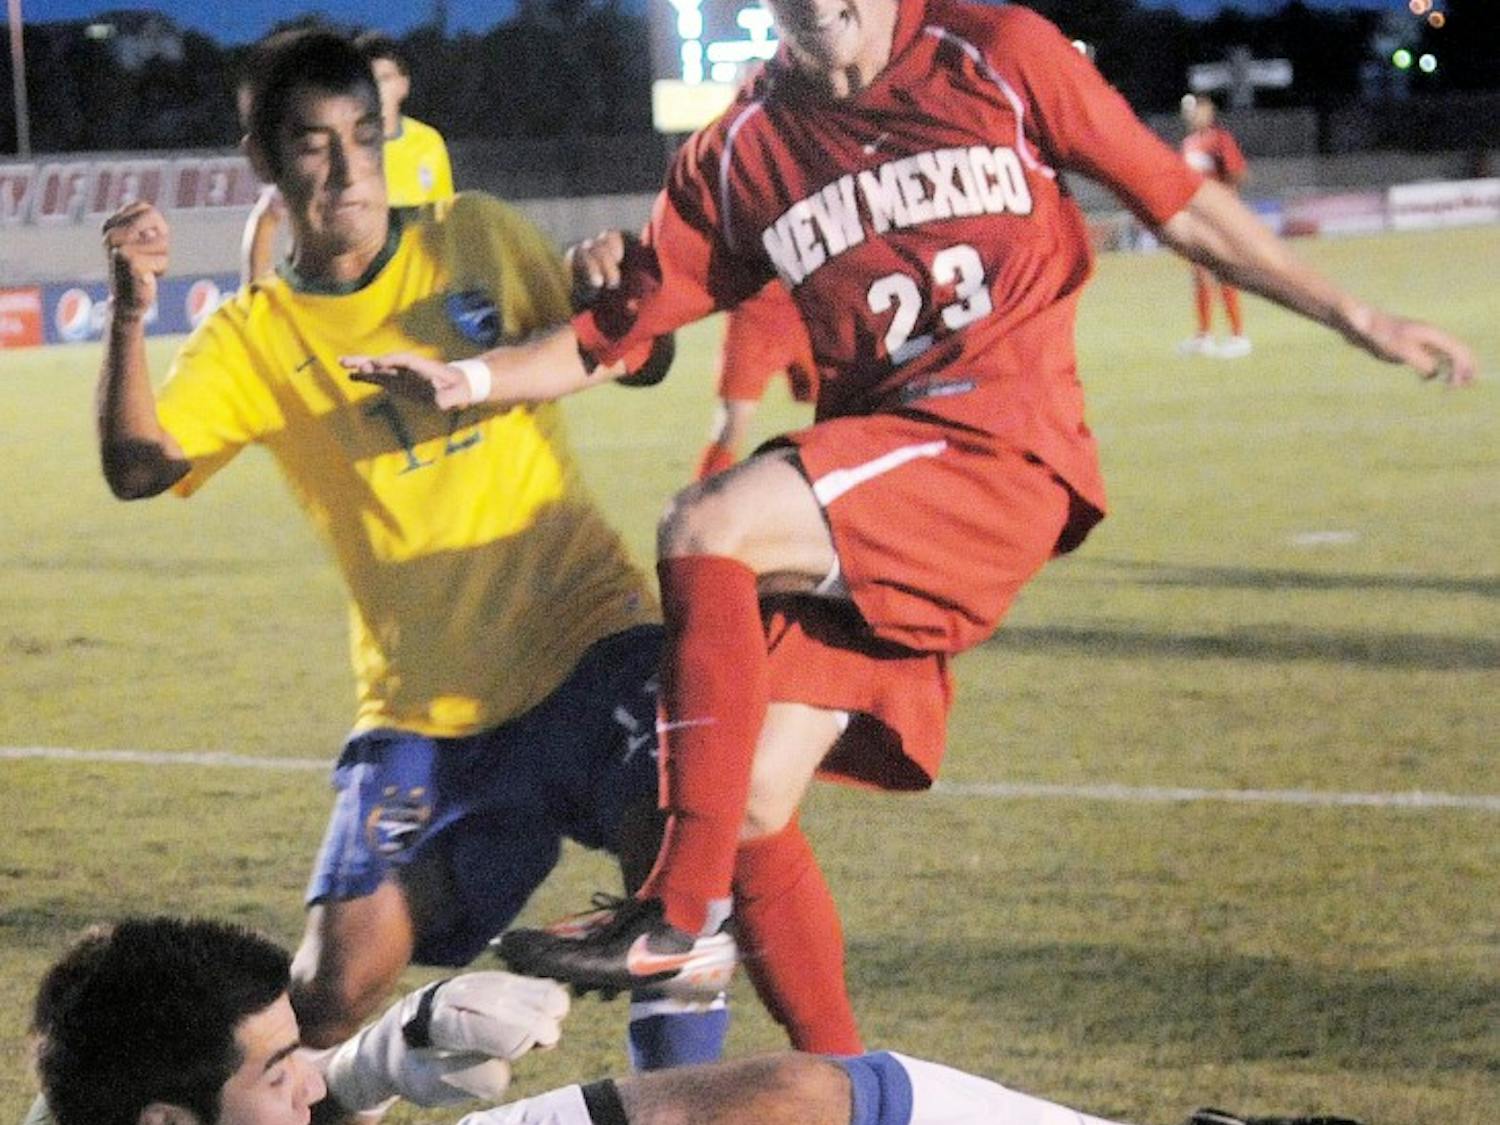 	UNM forward Blake Smith and Fort Lewis midfielder Cory Dean battle for the ball in front of Fort Lewis goalkeeper Ryan Wirth, in a 2-1 overtime victory for the Lobos on Aug. 27. UNM will play two nationally ranked opponents this weekend facing Georgetown on Friday and Portland on Sunday at UNM Soccer Complex.